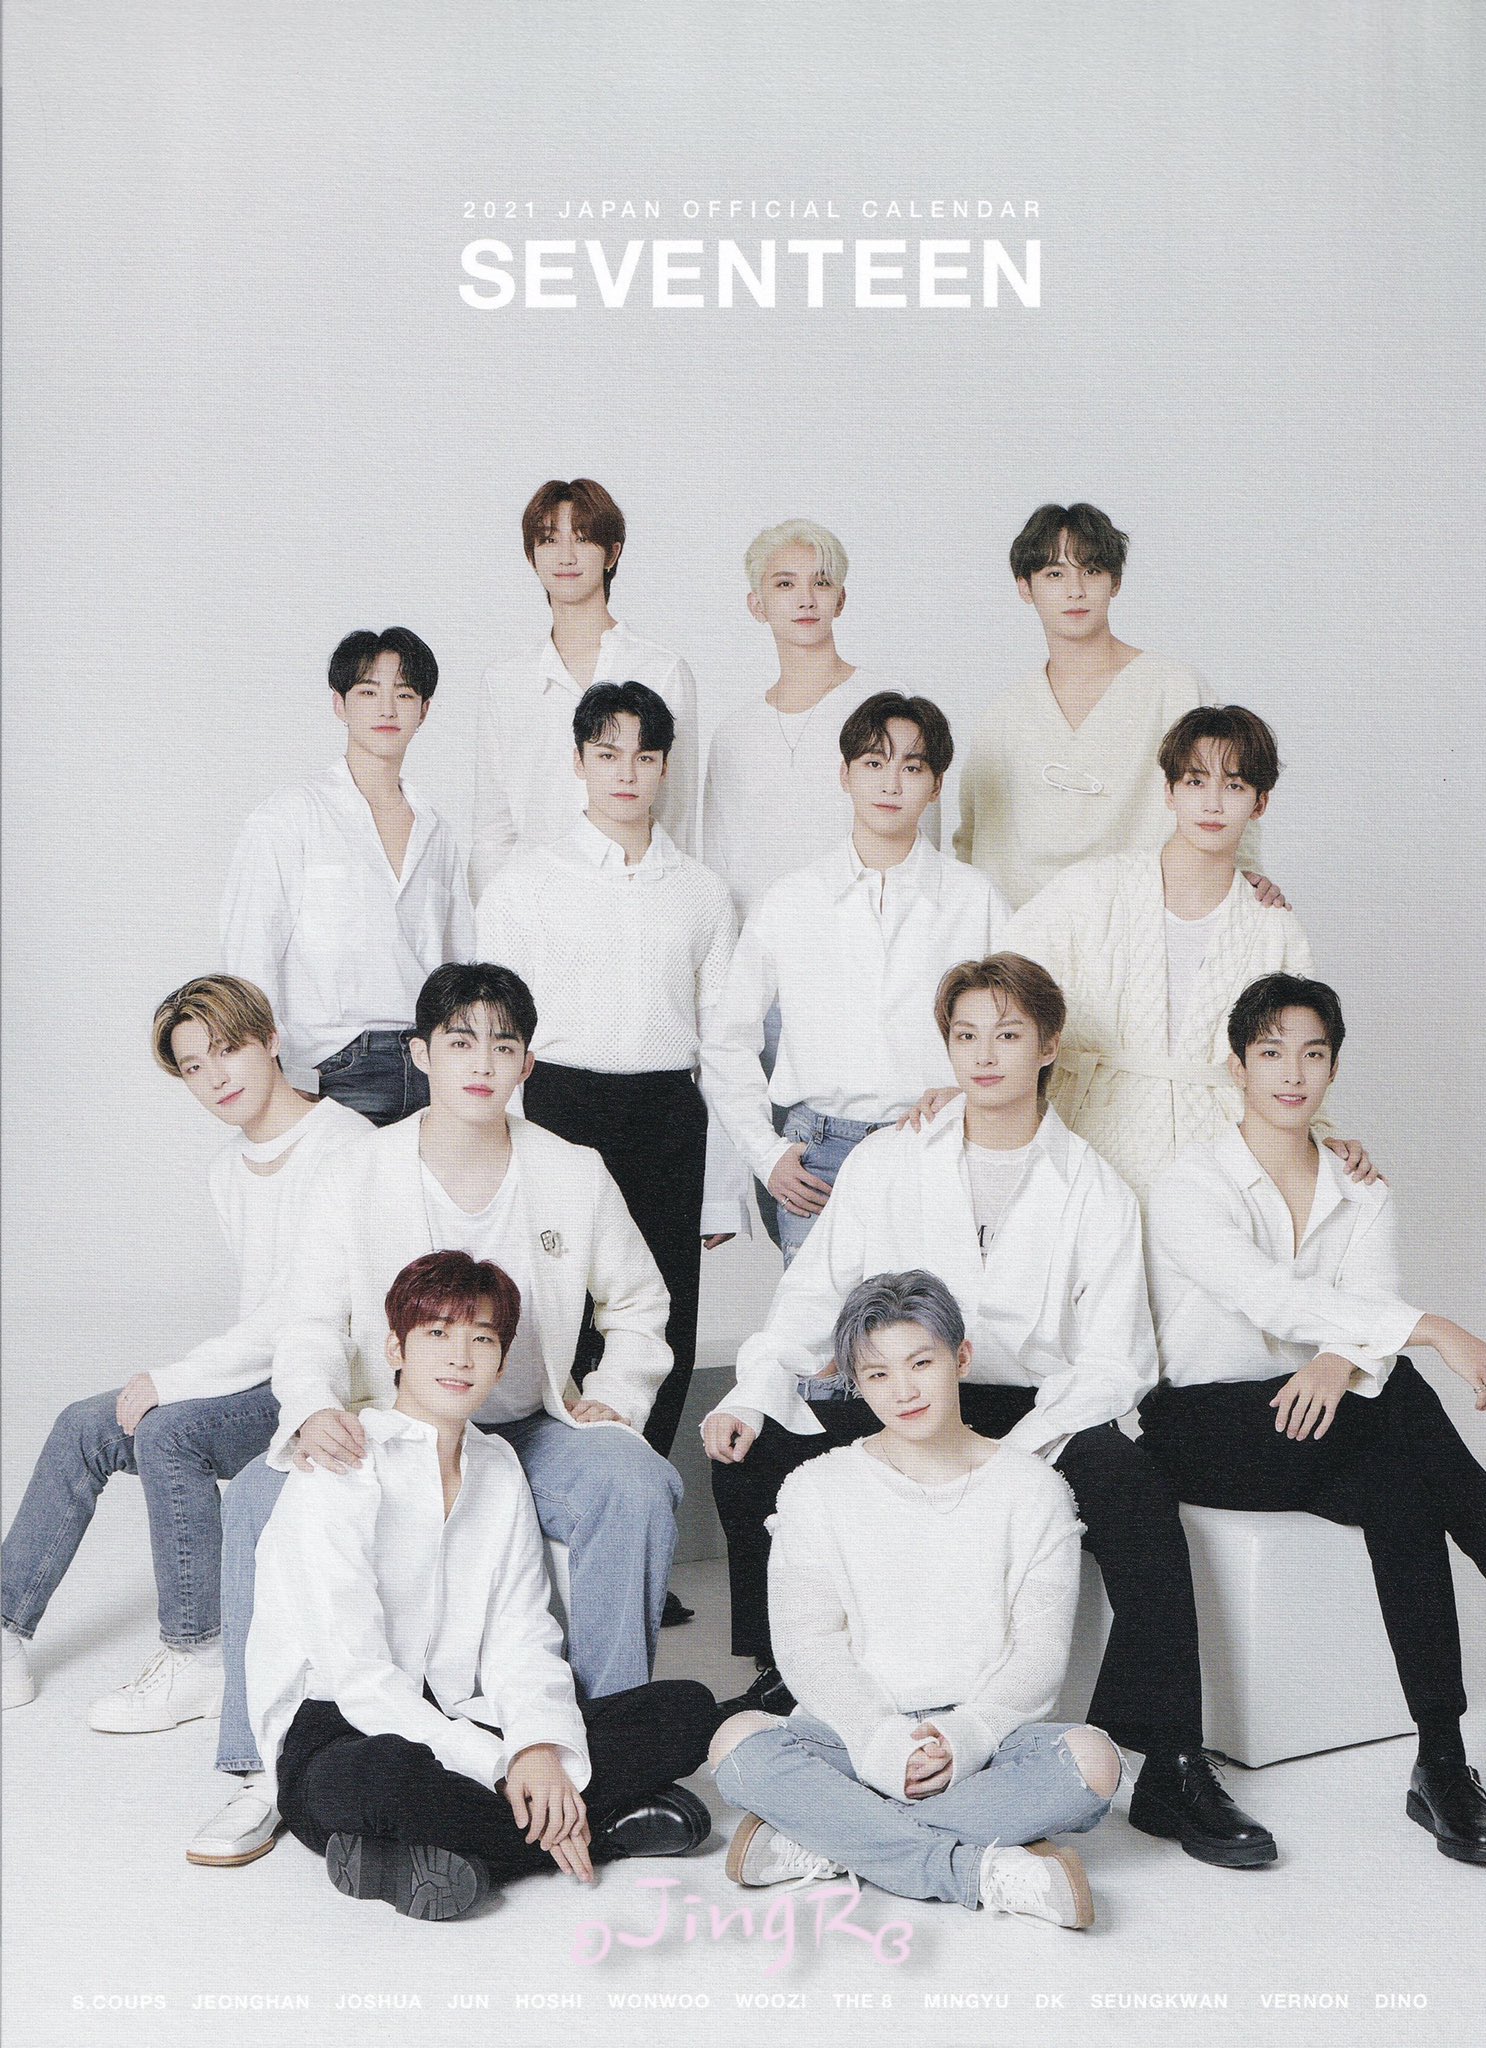 𝐽𝑖𝑛𝑔𝑅 Scan Seventeen 21 Japan Official Calendar Please Do Not Reupload Without Permission Or Edit My Scans For Selling T Co Zmjmf7cqwr Twitter